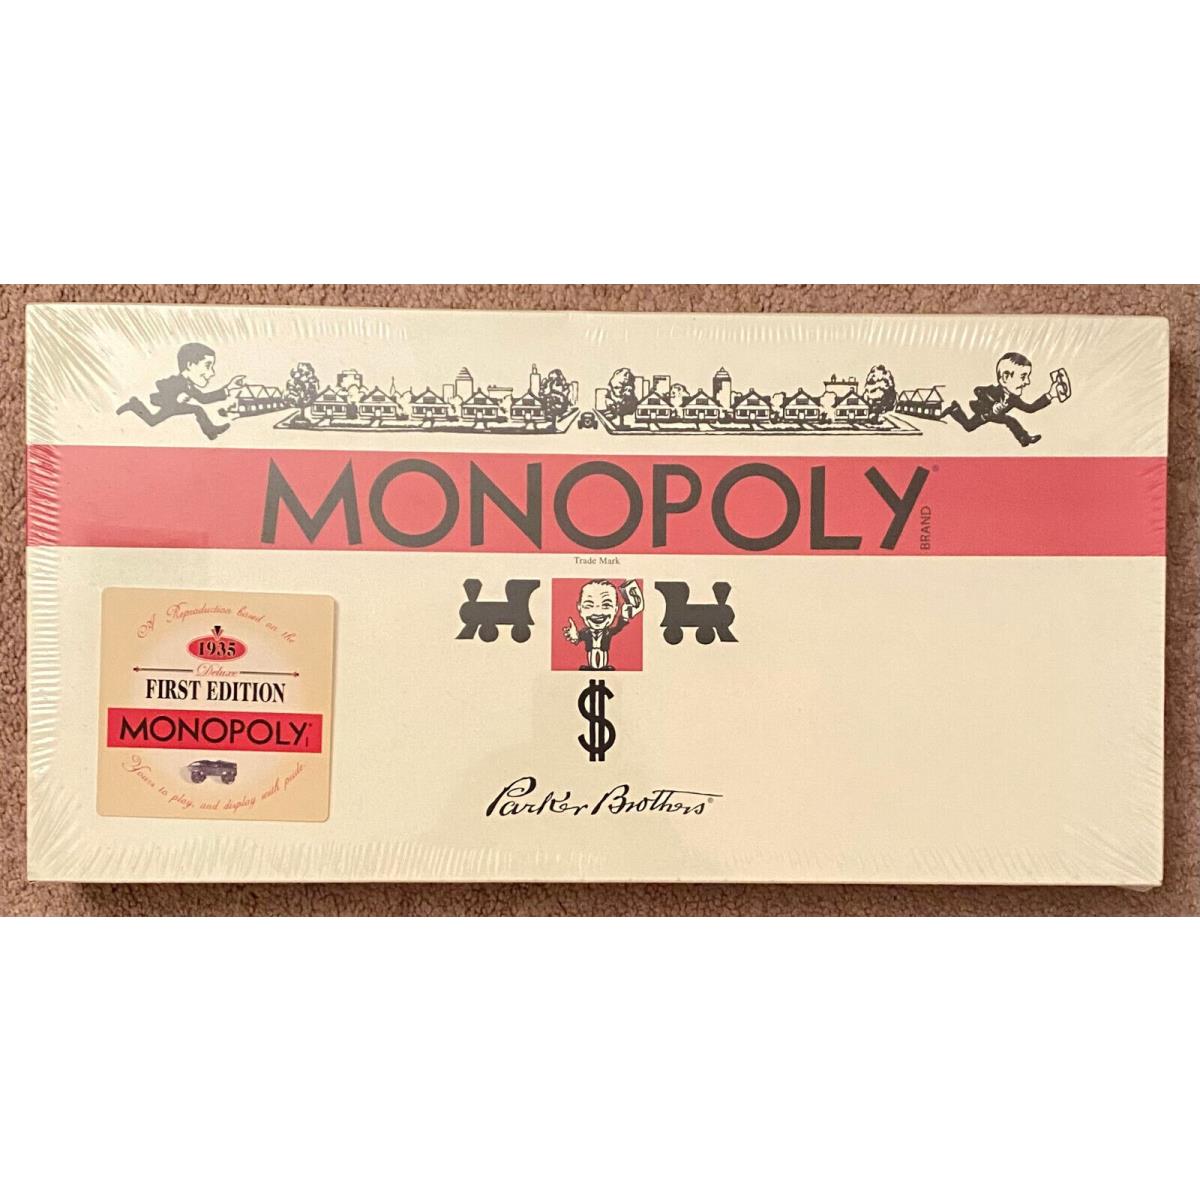 2002 Monopoly Deluxe First Edition Board Game Rare